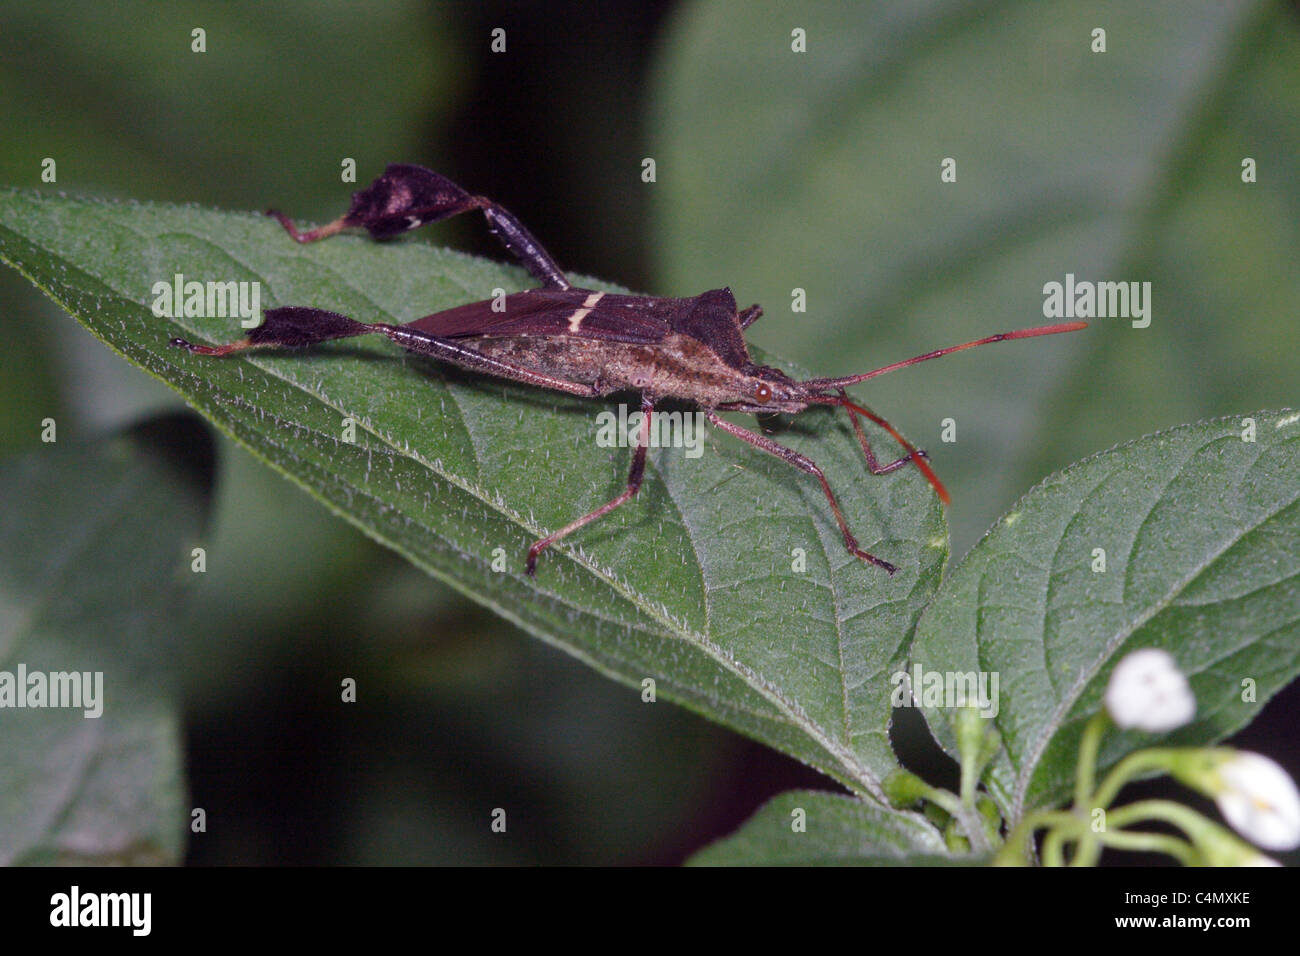 Leaffooted Bug- Leptoglossus phyllopus Stock Photo